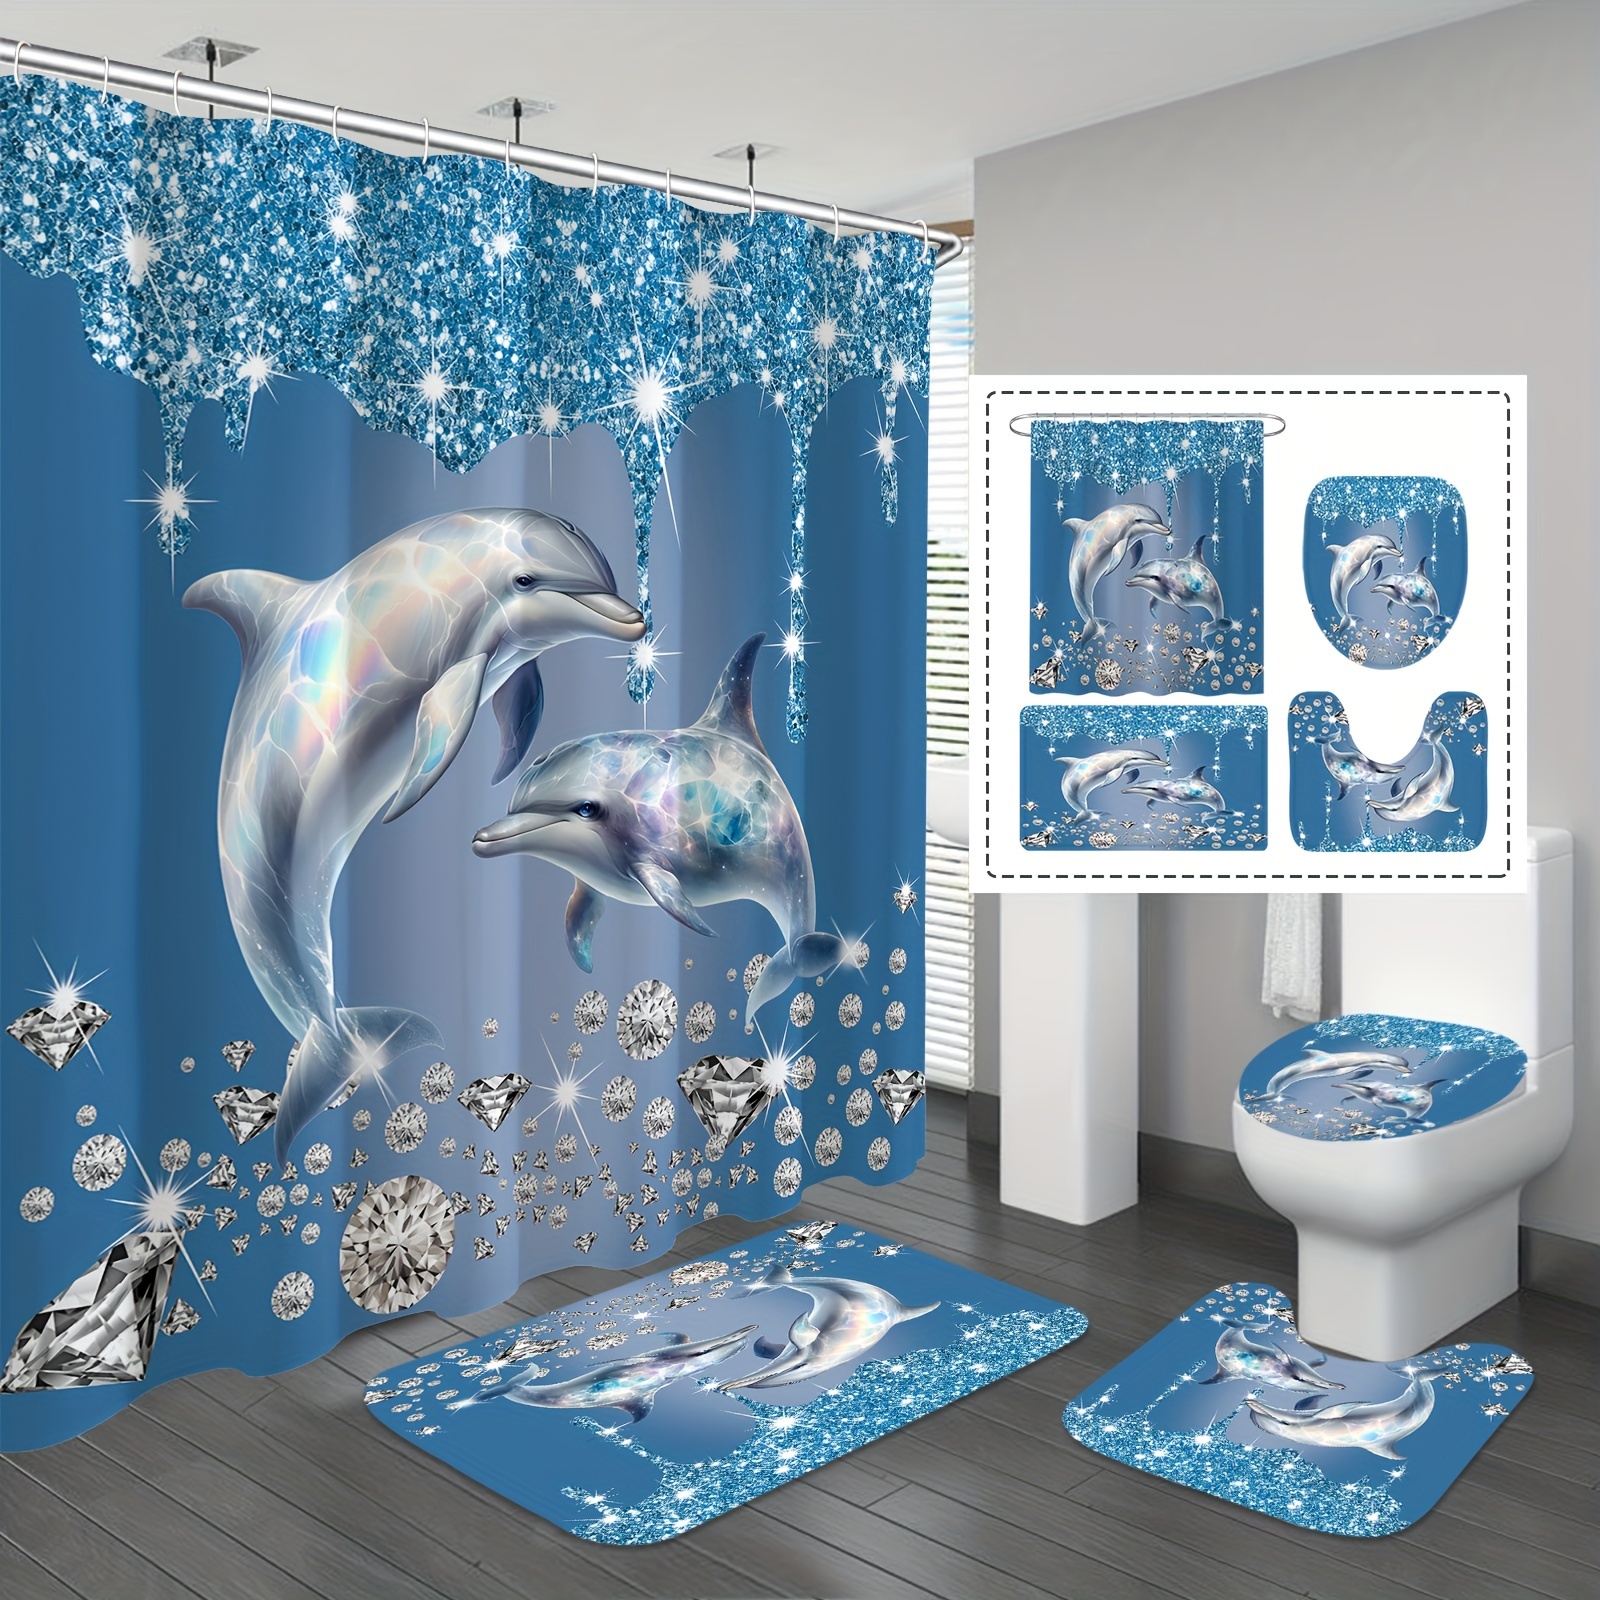 

1/4pcs Blue Glitter Shower Curtain Set, Elegant Bathroom Sets With Shower Curtain And Rugs, Waterproof Polyester Fabric Shower Curtains Bathroom Decor With 12 Hooks, Bathroom Accessories